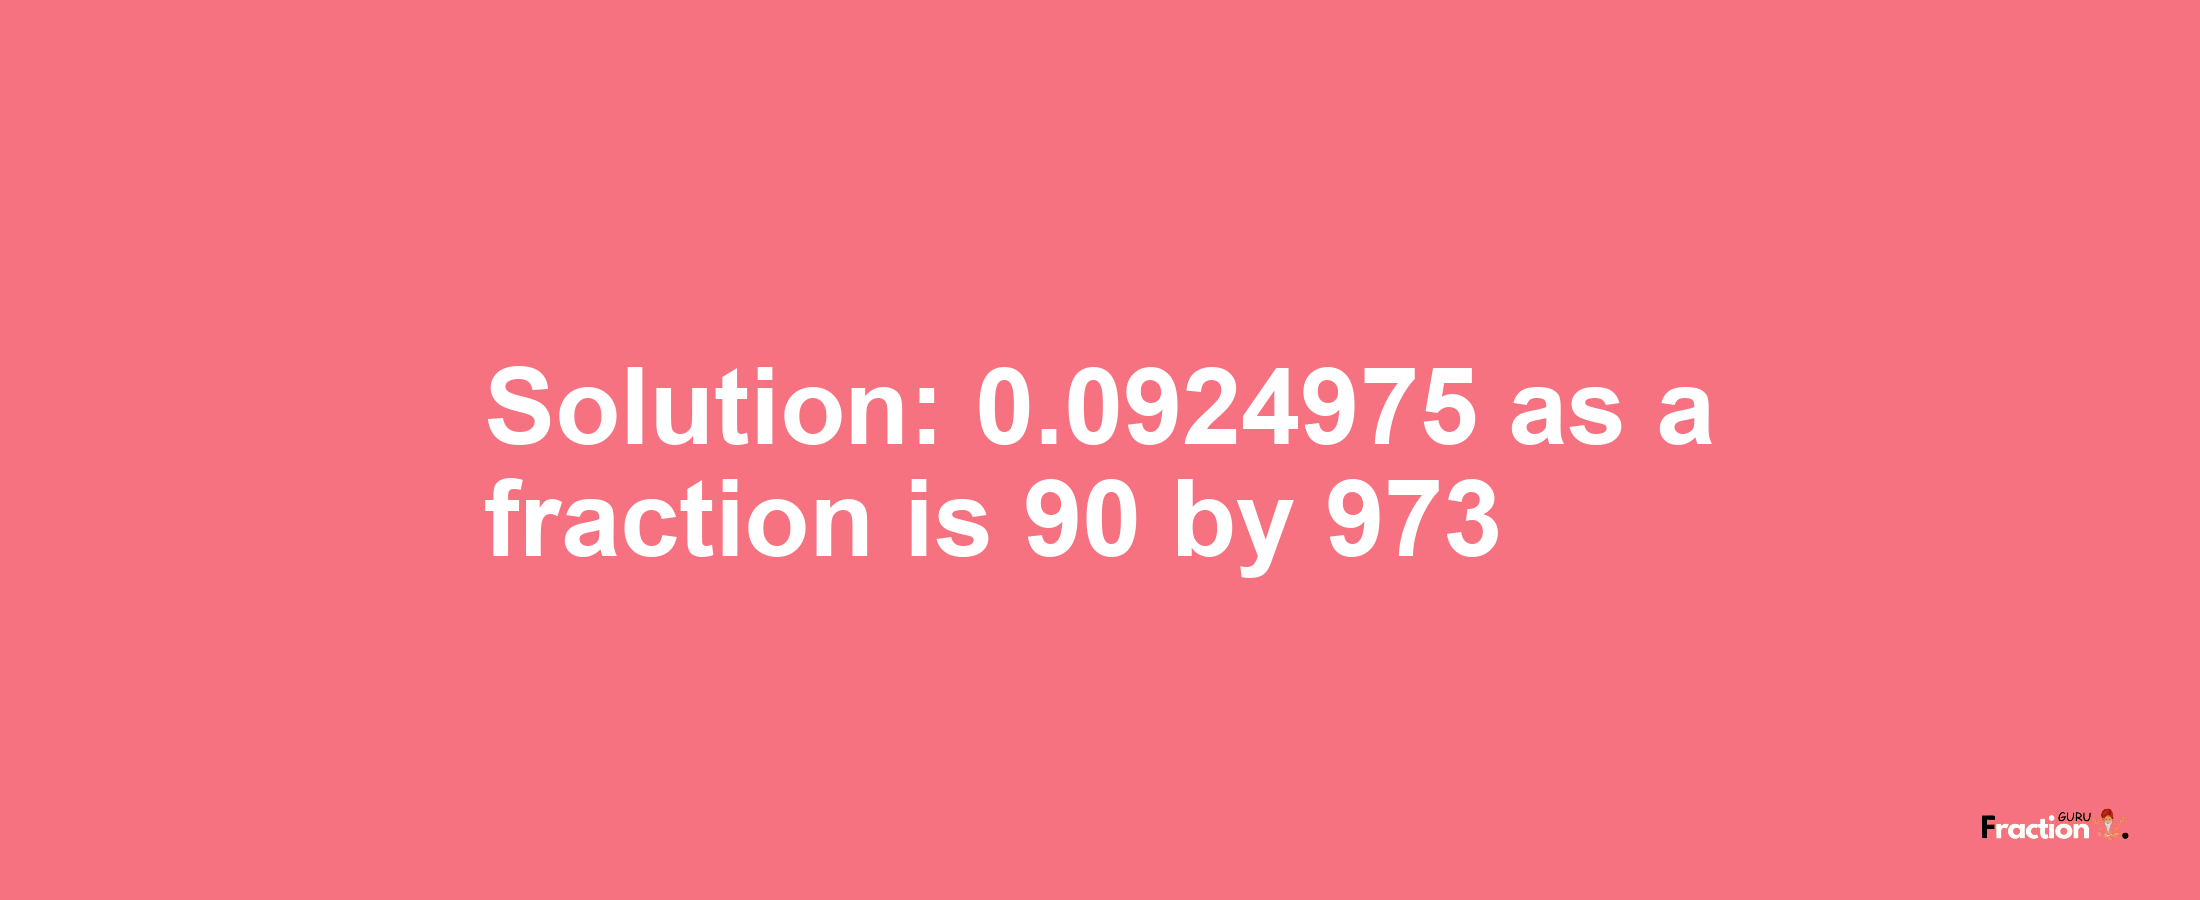 Solution:0.0924975 as a fraction is 90/973